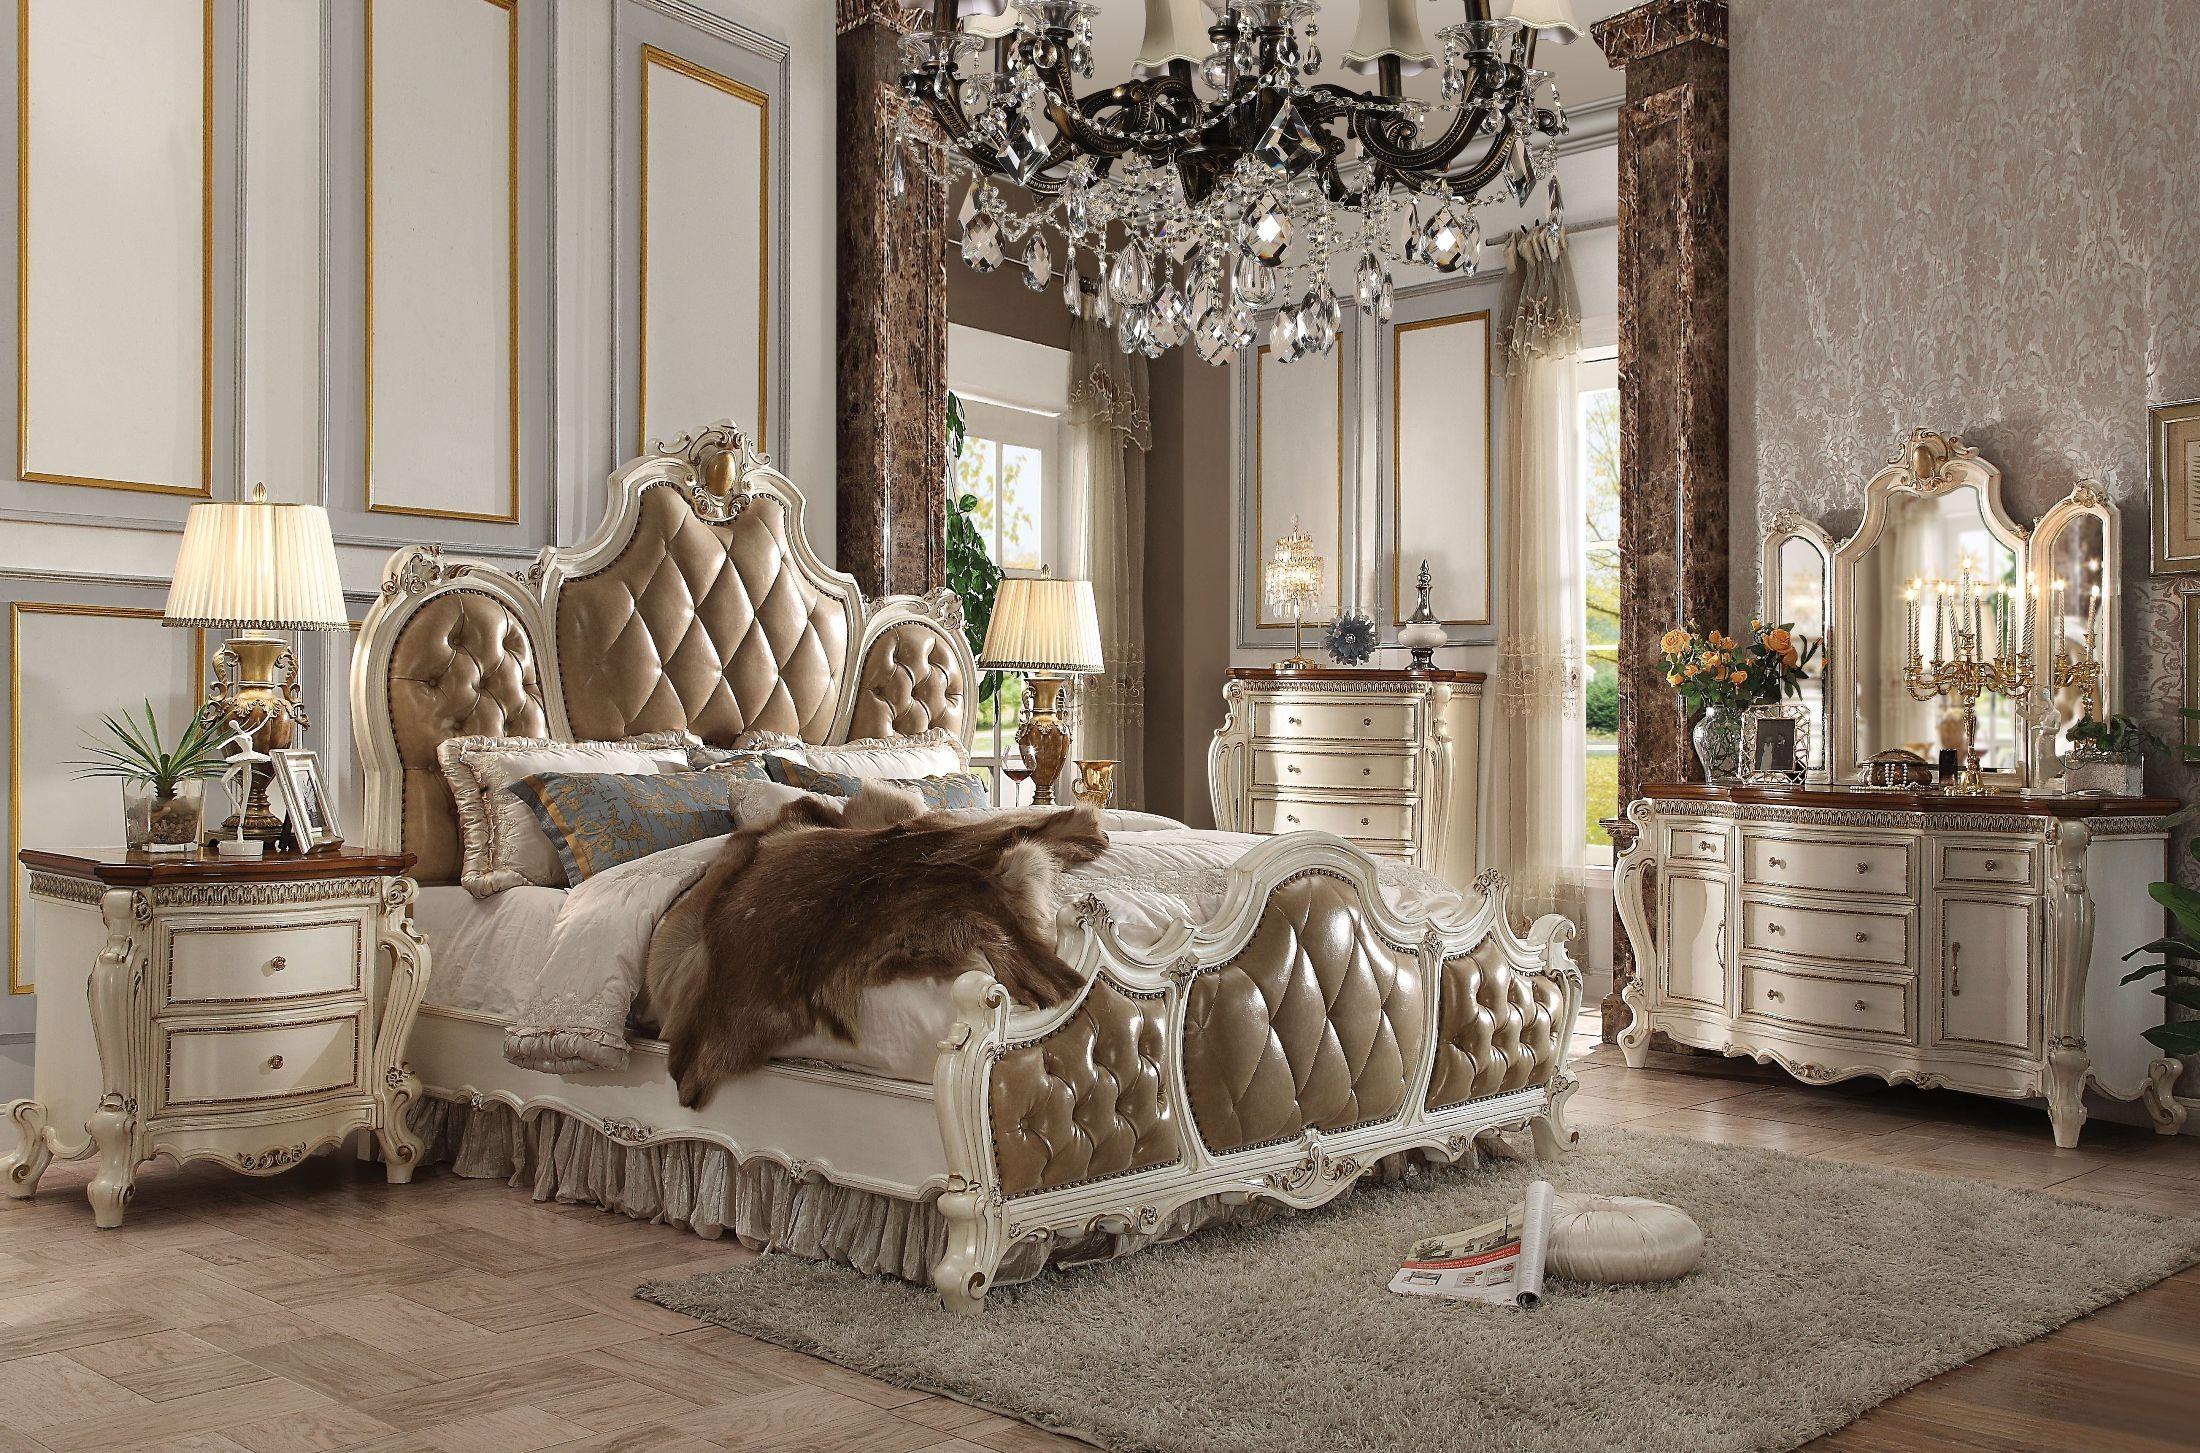 

    
Dili Upholstered Standard Bedroom Set 5Pcs QUEEN Antique Pearl & Brown Classic
